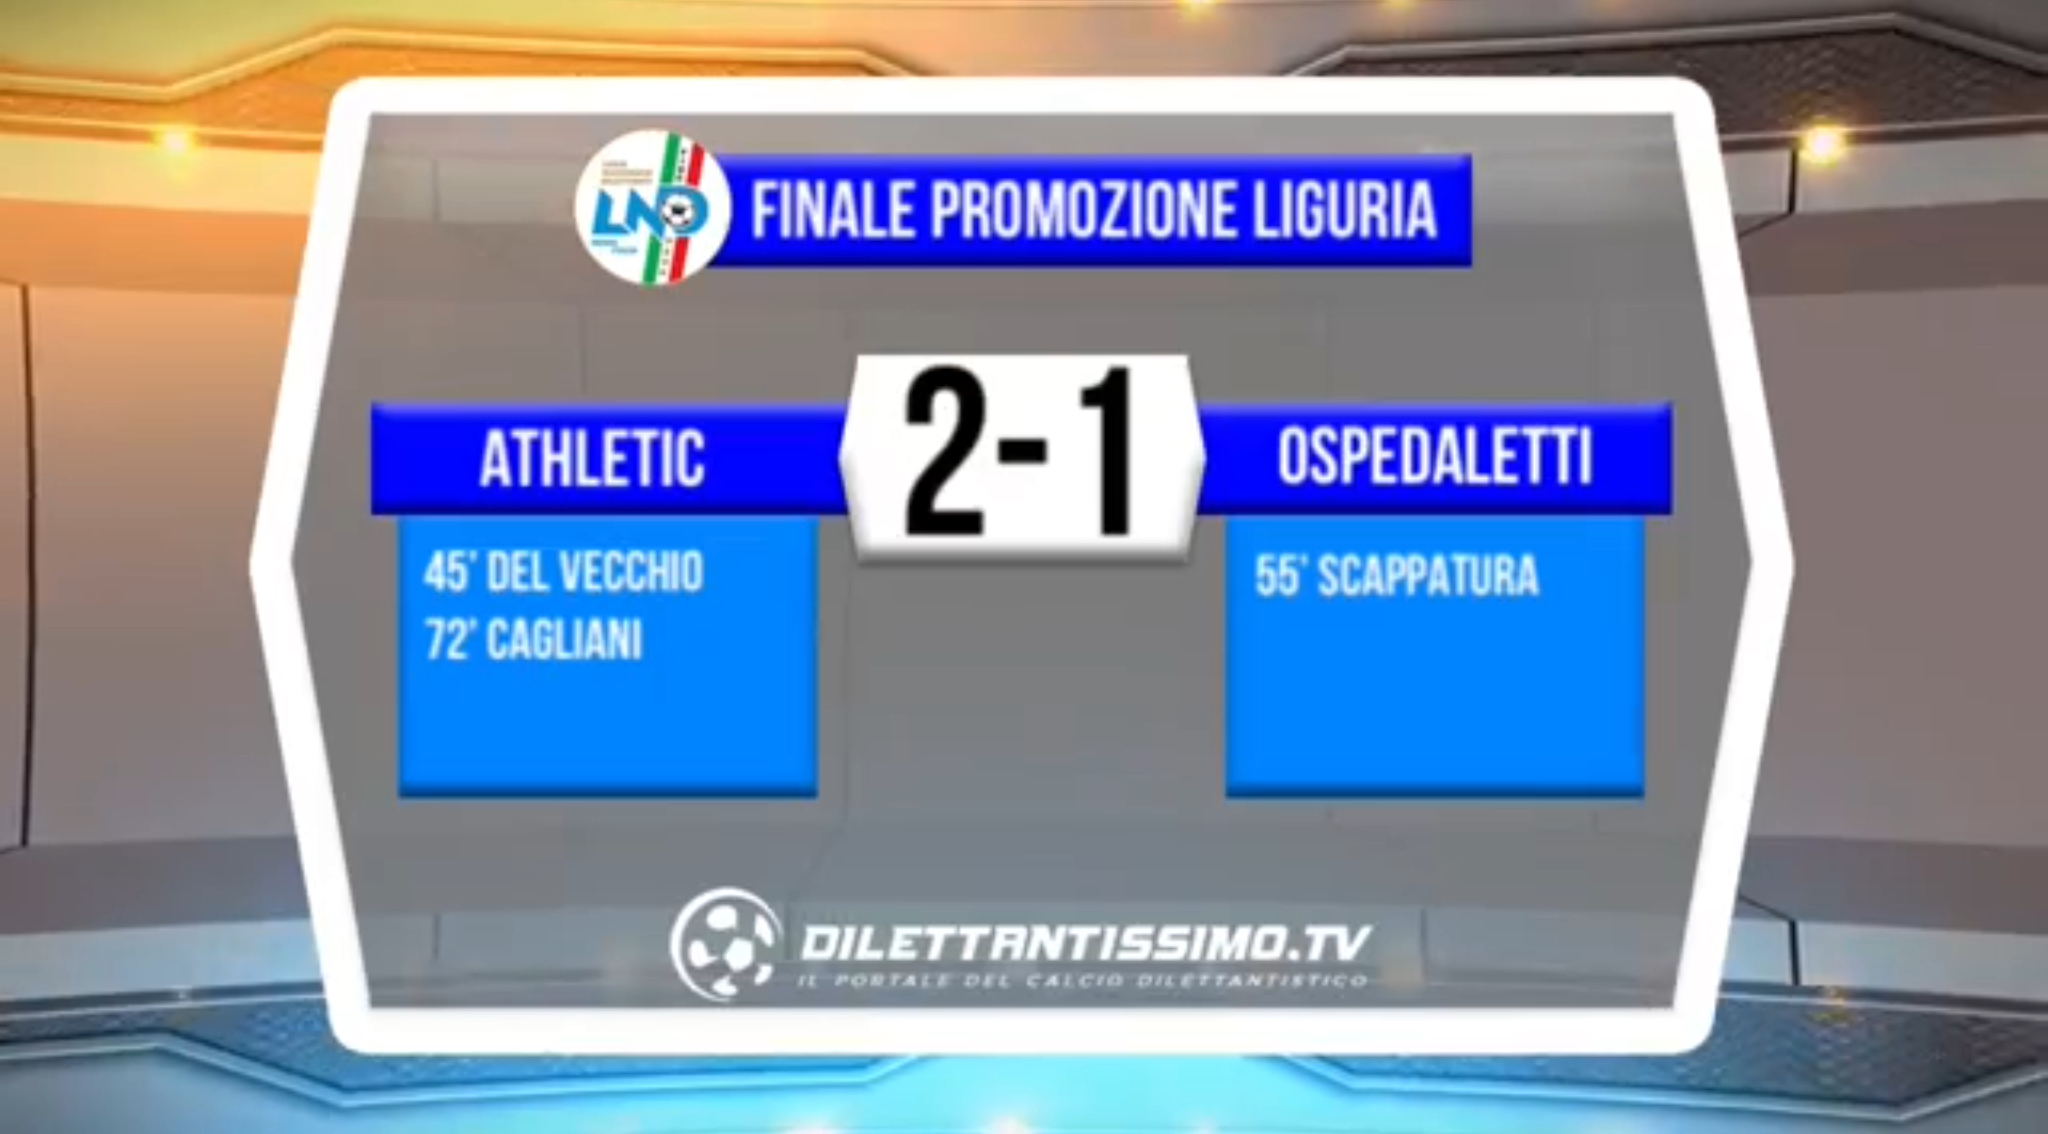 VIDEO: ATHLETIC – OSPEDALETTI 2-1. HIGHLIGHTS